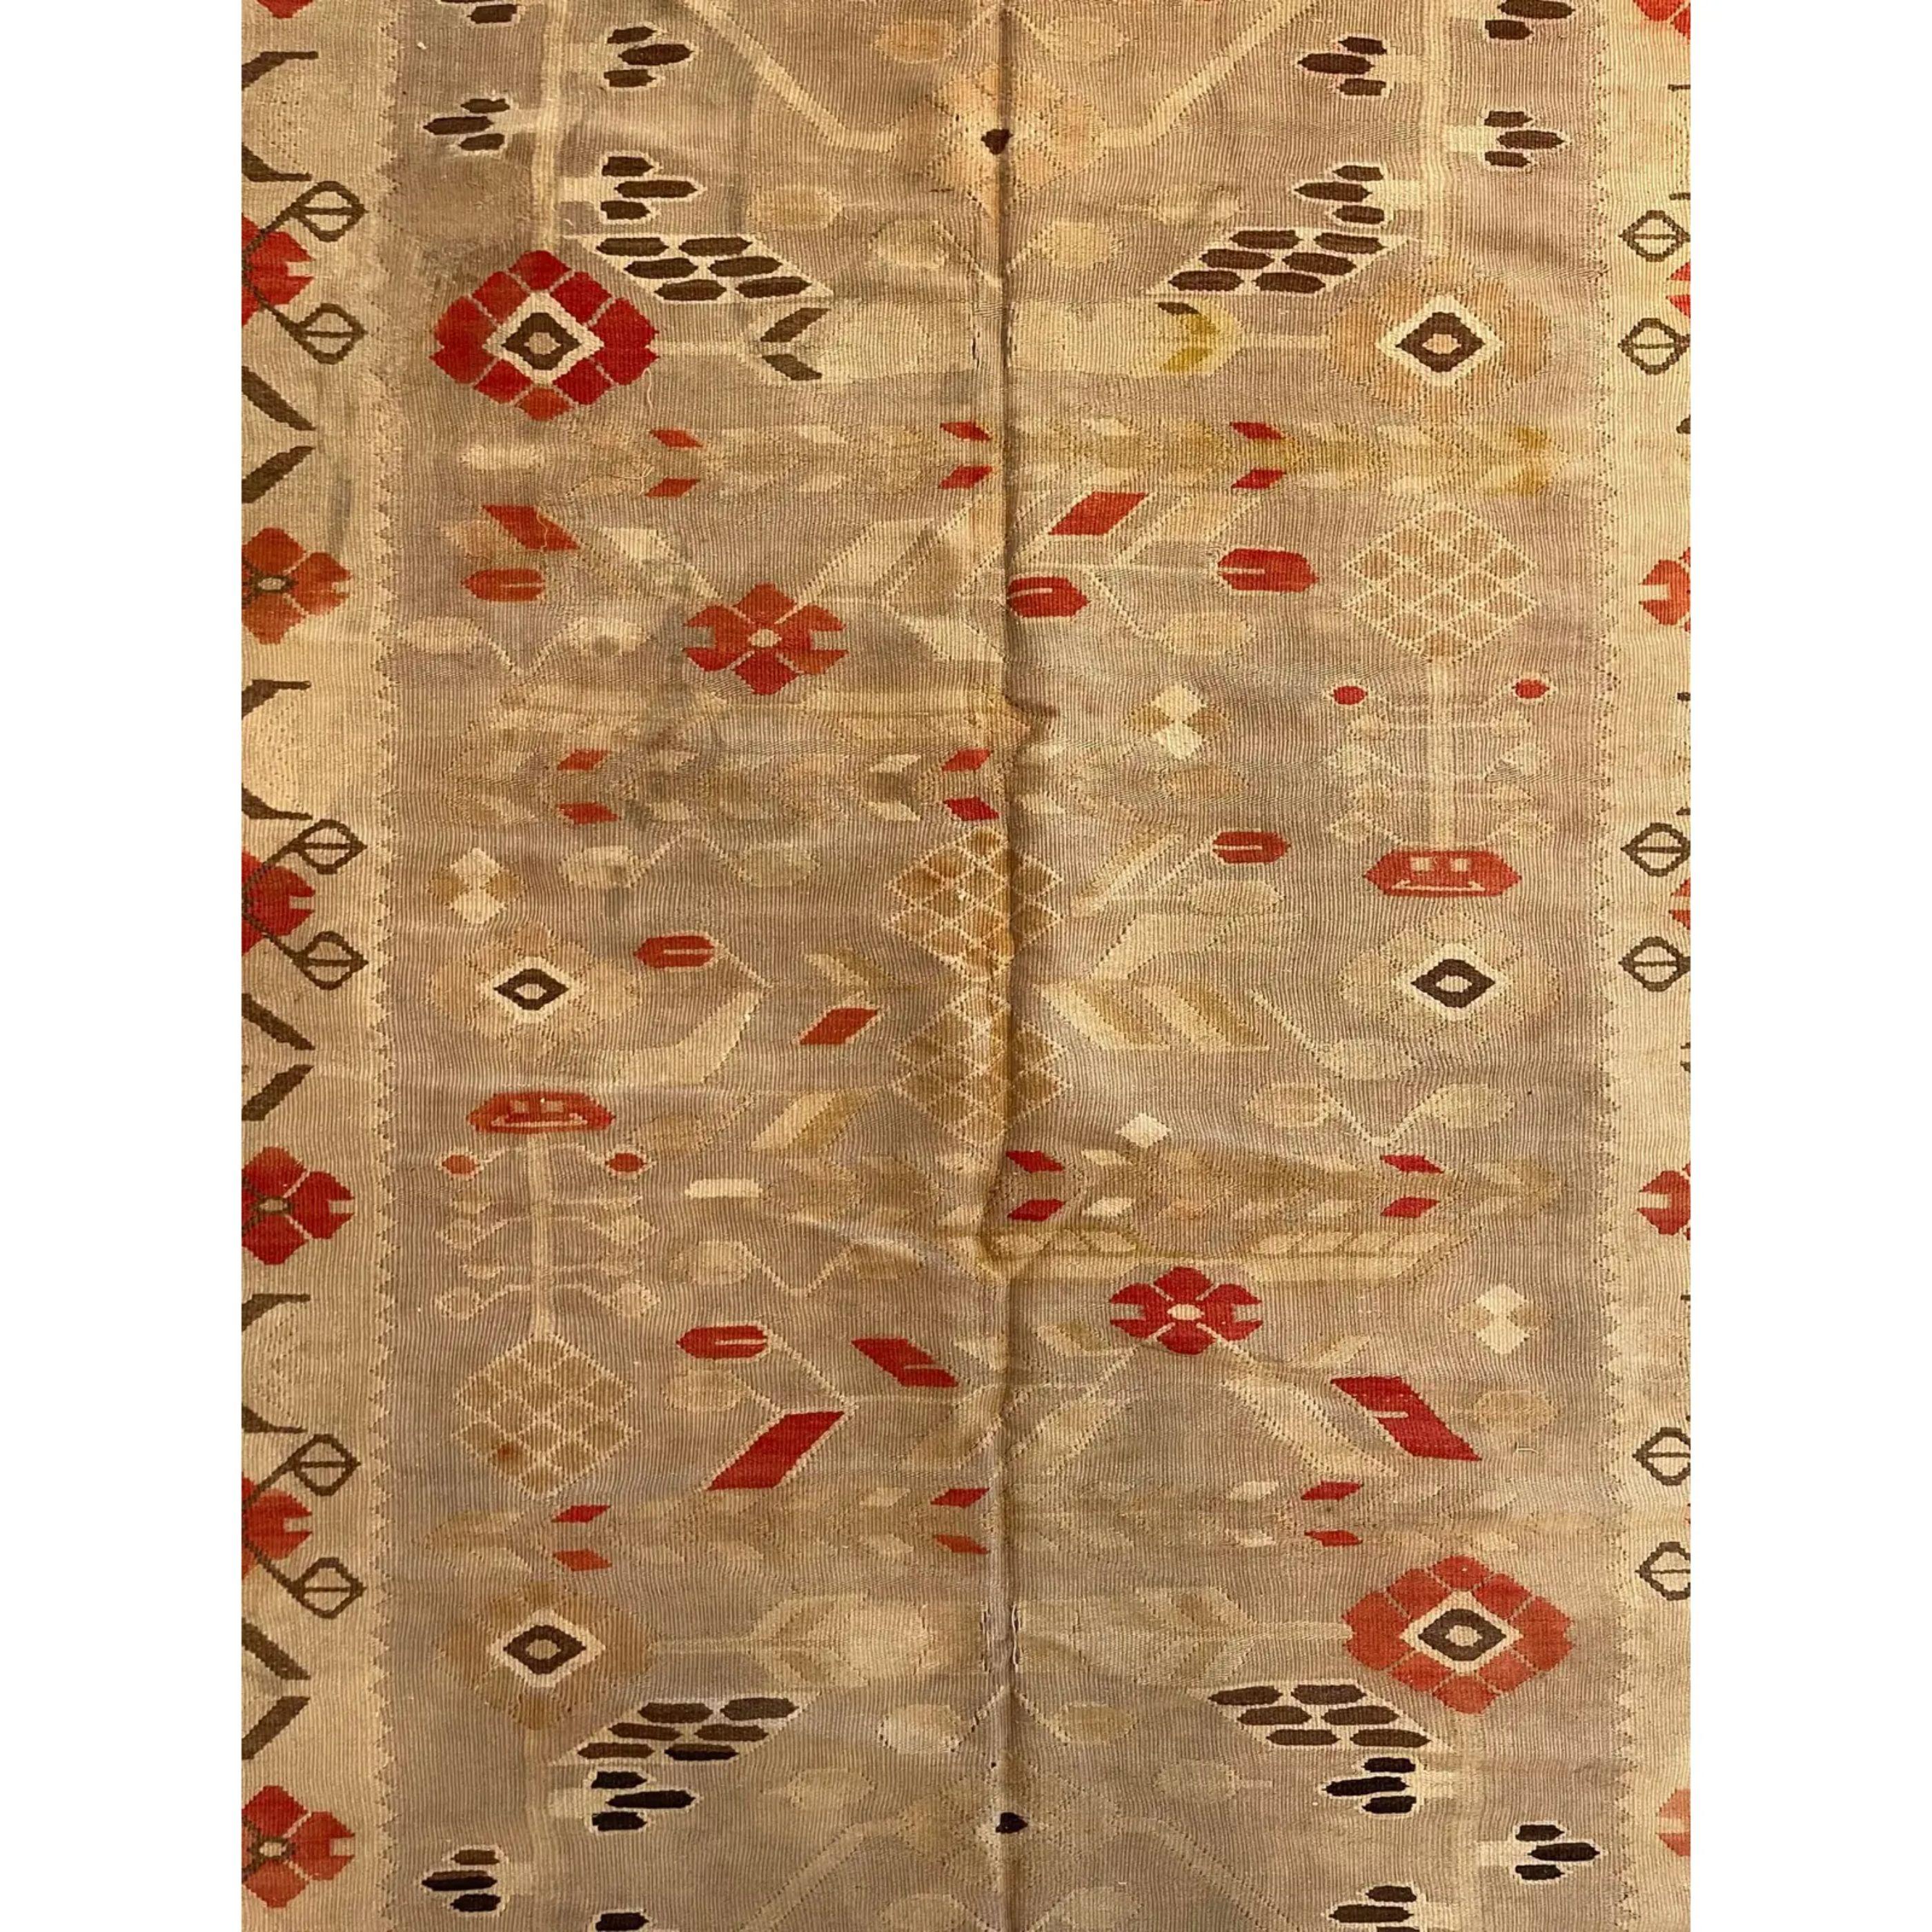 Antique Bessarabian Rugs / Kilims in both pile and tapestry weaving technique are some of the more beautiful carpets to have been produced in Europe. Many of the Bessarabian Kilims were woven around the mid to late 19th century, though some do date